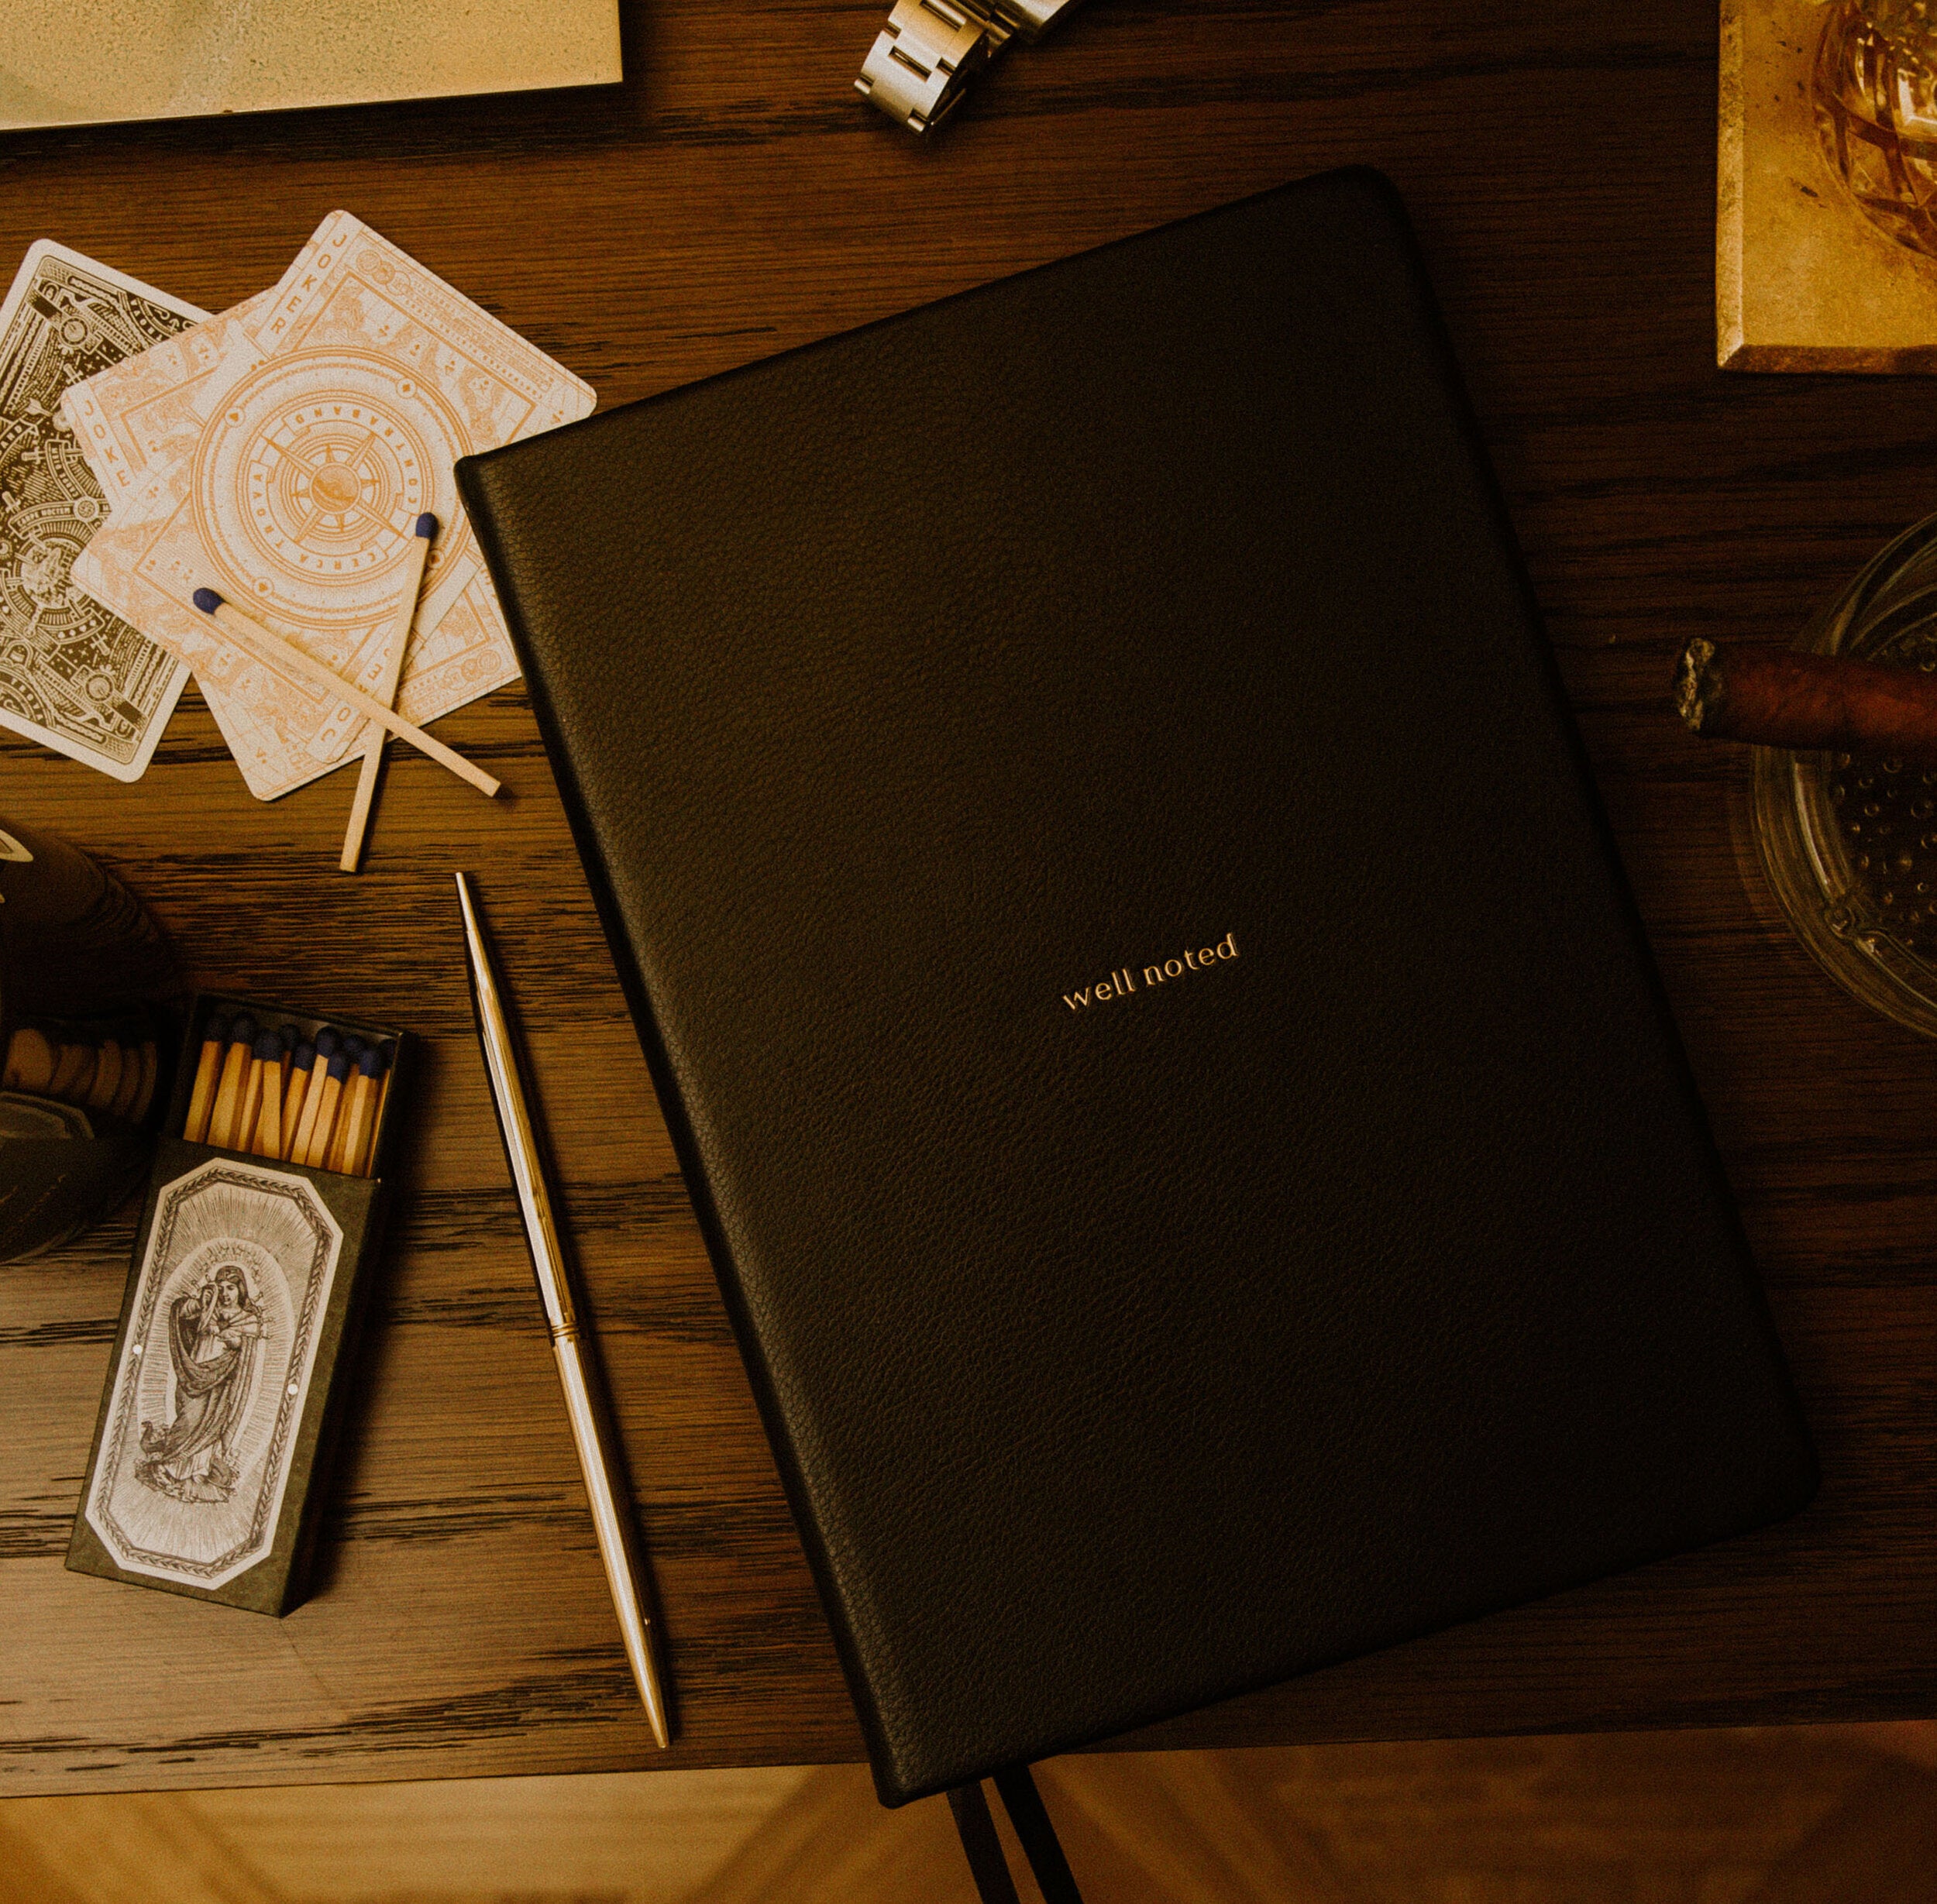 High quality black leather Notebook by Wellnoted on a desk